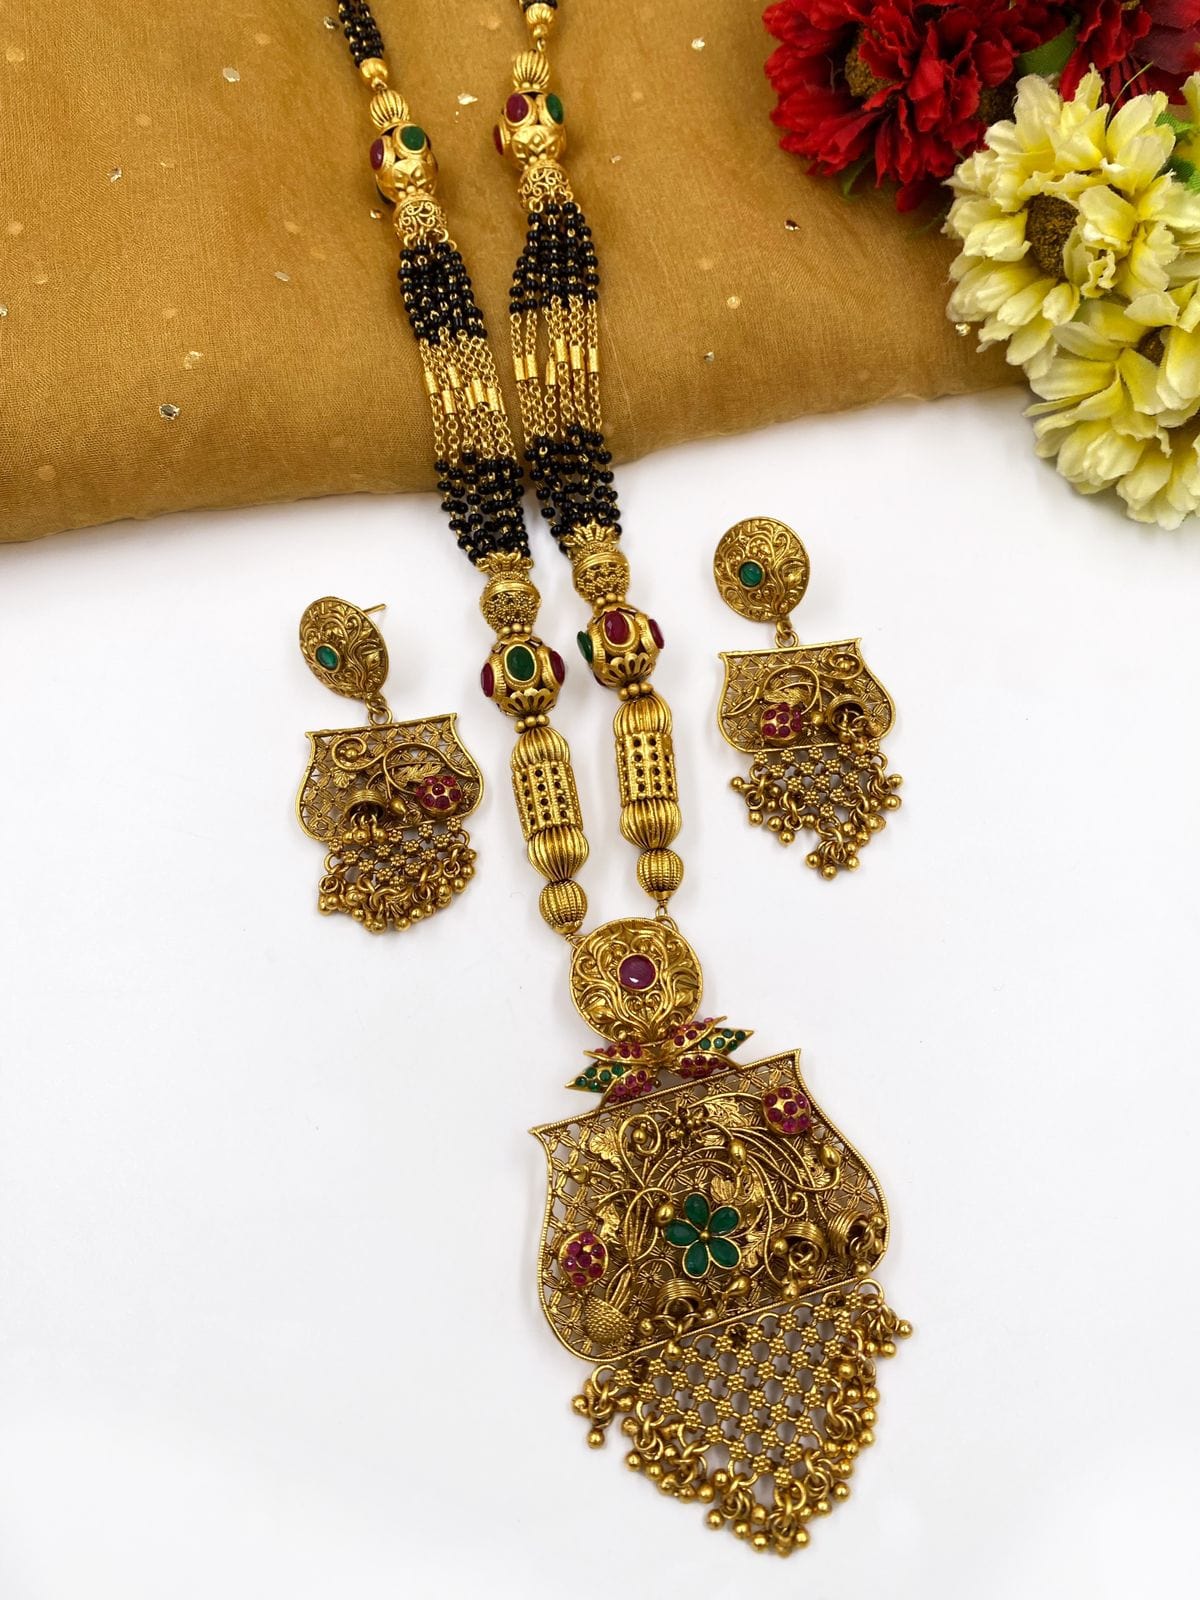 Buy Digital Dress Room Long Mangalsutra Designs with earrings Gold Plated  Necklace maharashtrian style vati pendant gold 4 layers black beads chain  Gold Mangalsutra Latest Designs For Women (37 Inches) at Amazon.in